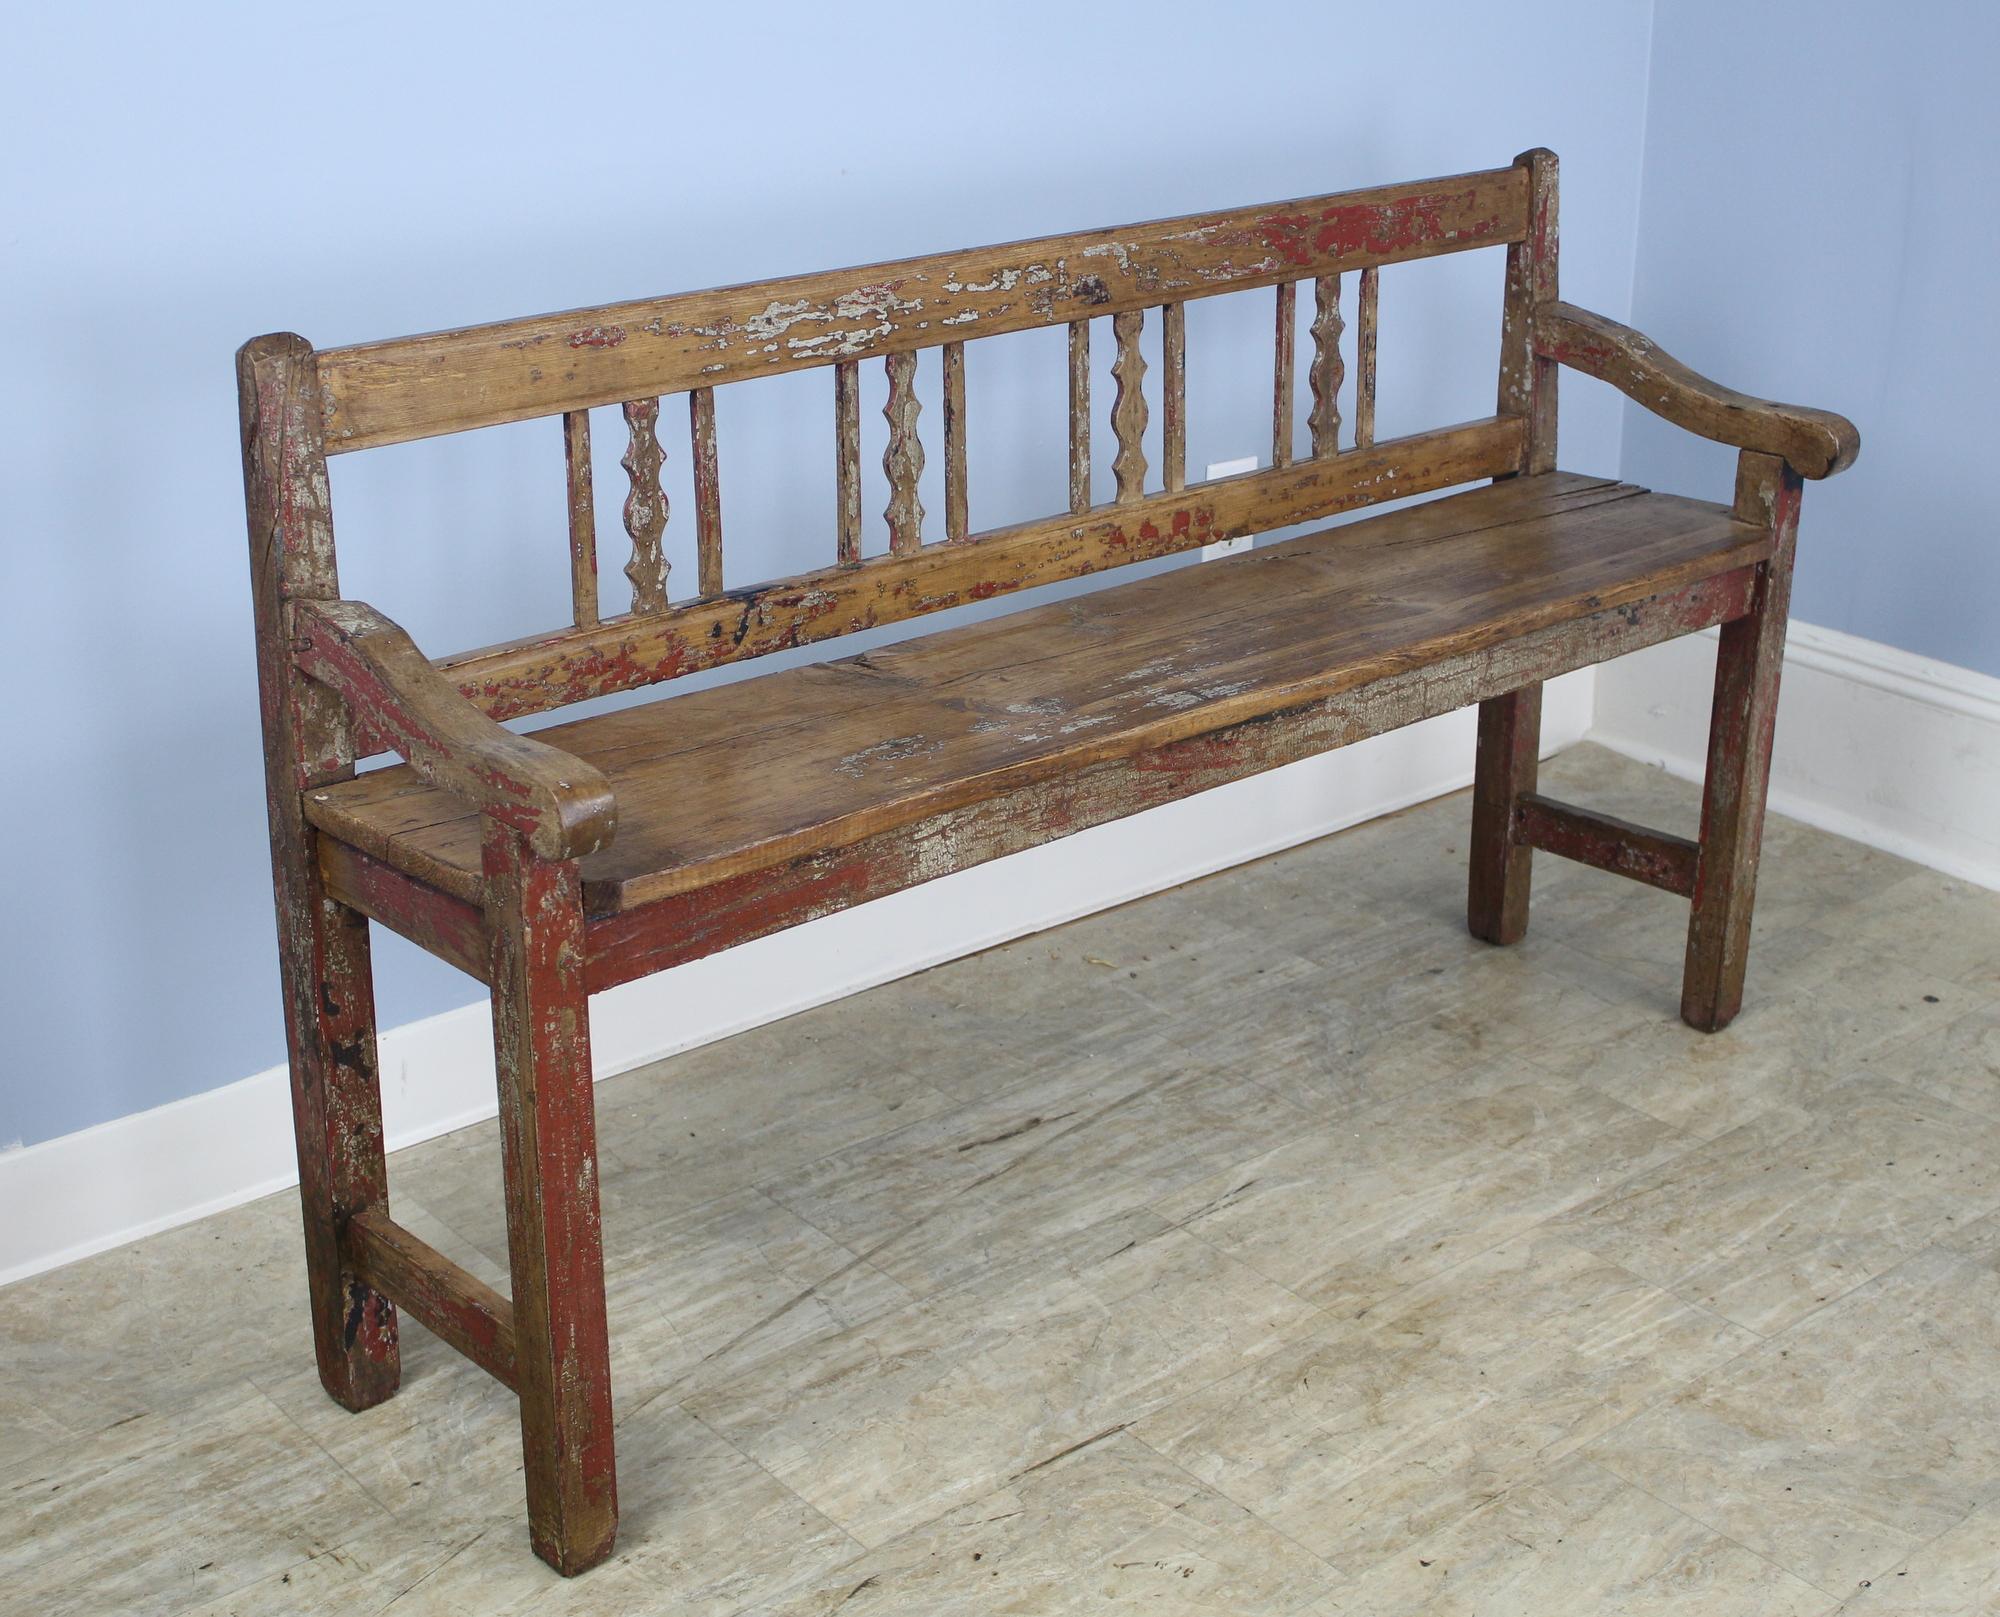 A dainty low hall bench with whimsical traces of the original paint. The perfect perch to put on your boots, or would be right at the end of the bed. Sturdy and nicely proportioned.